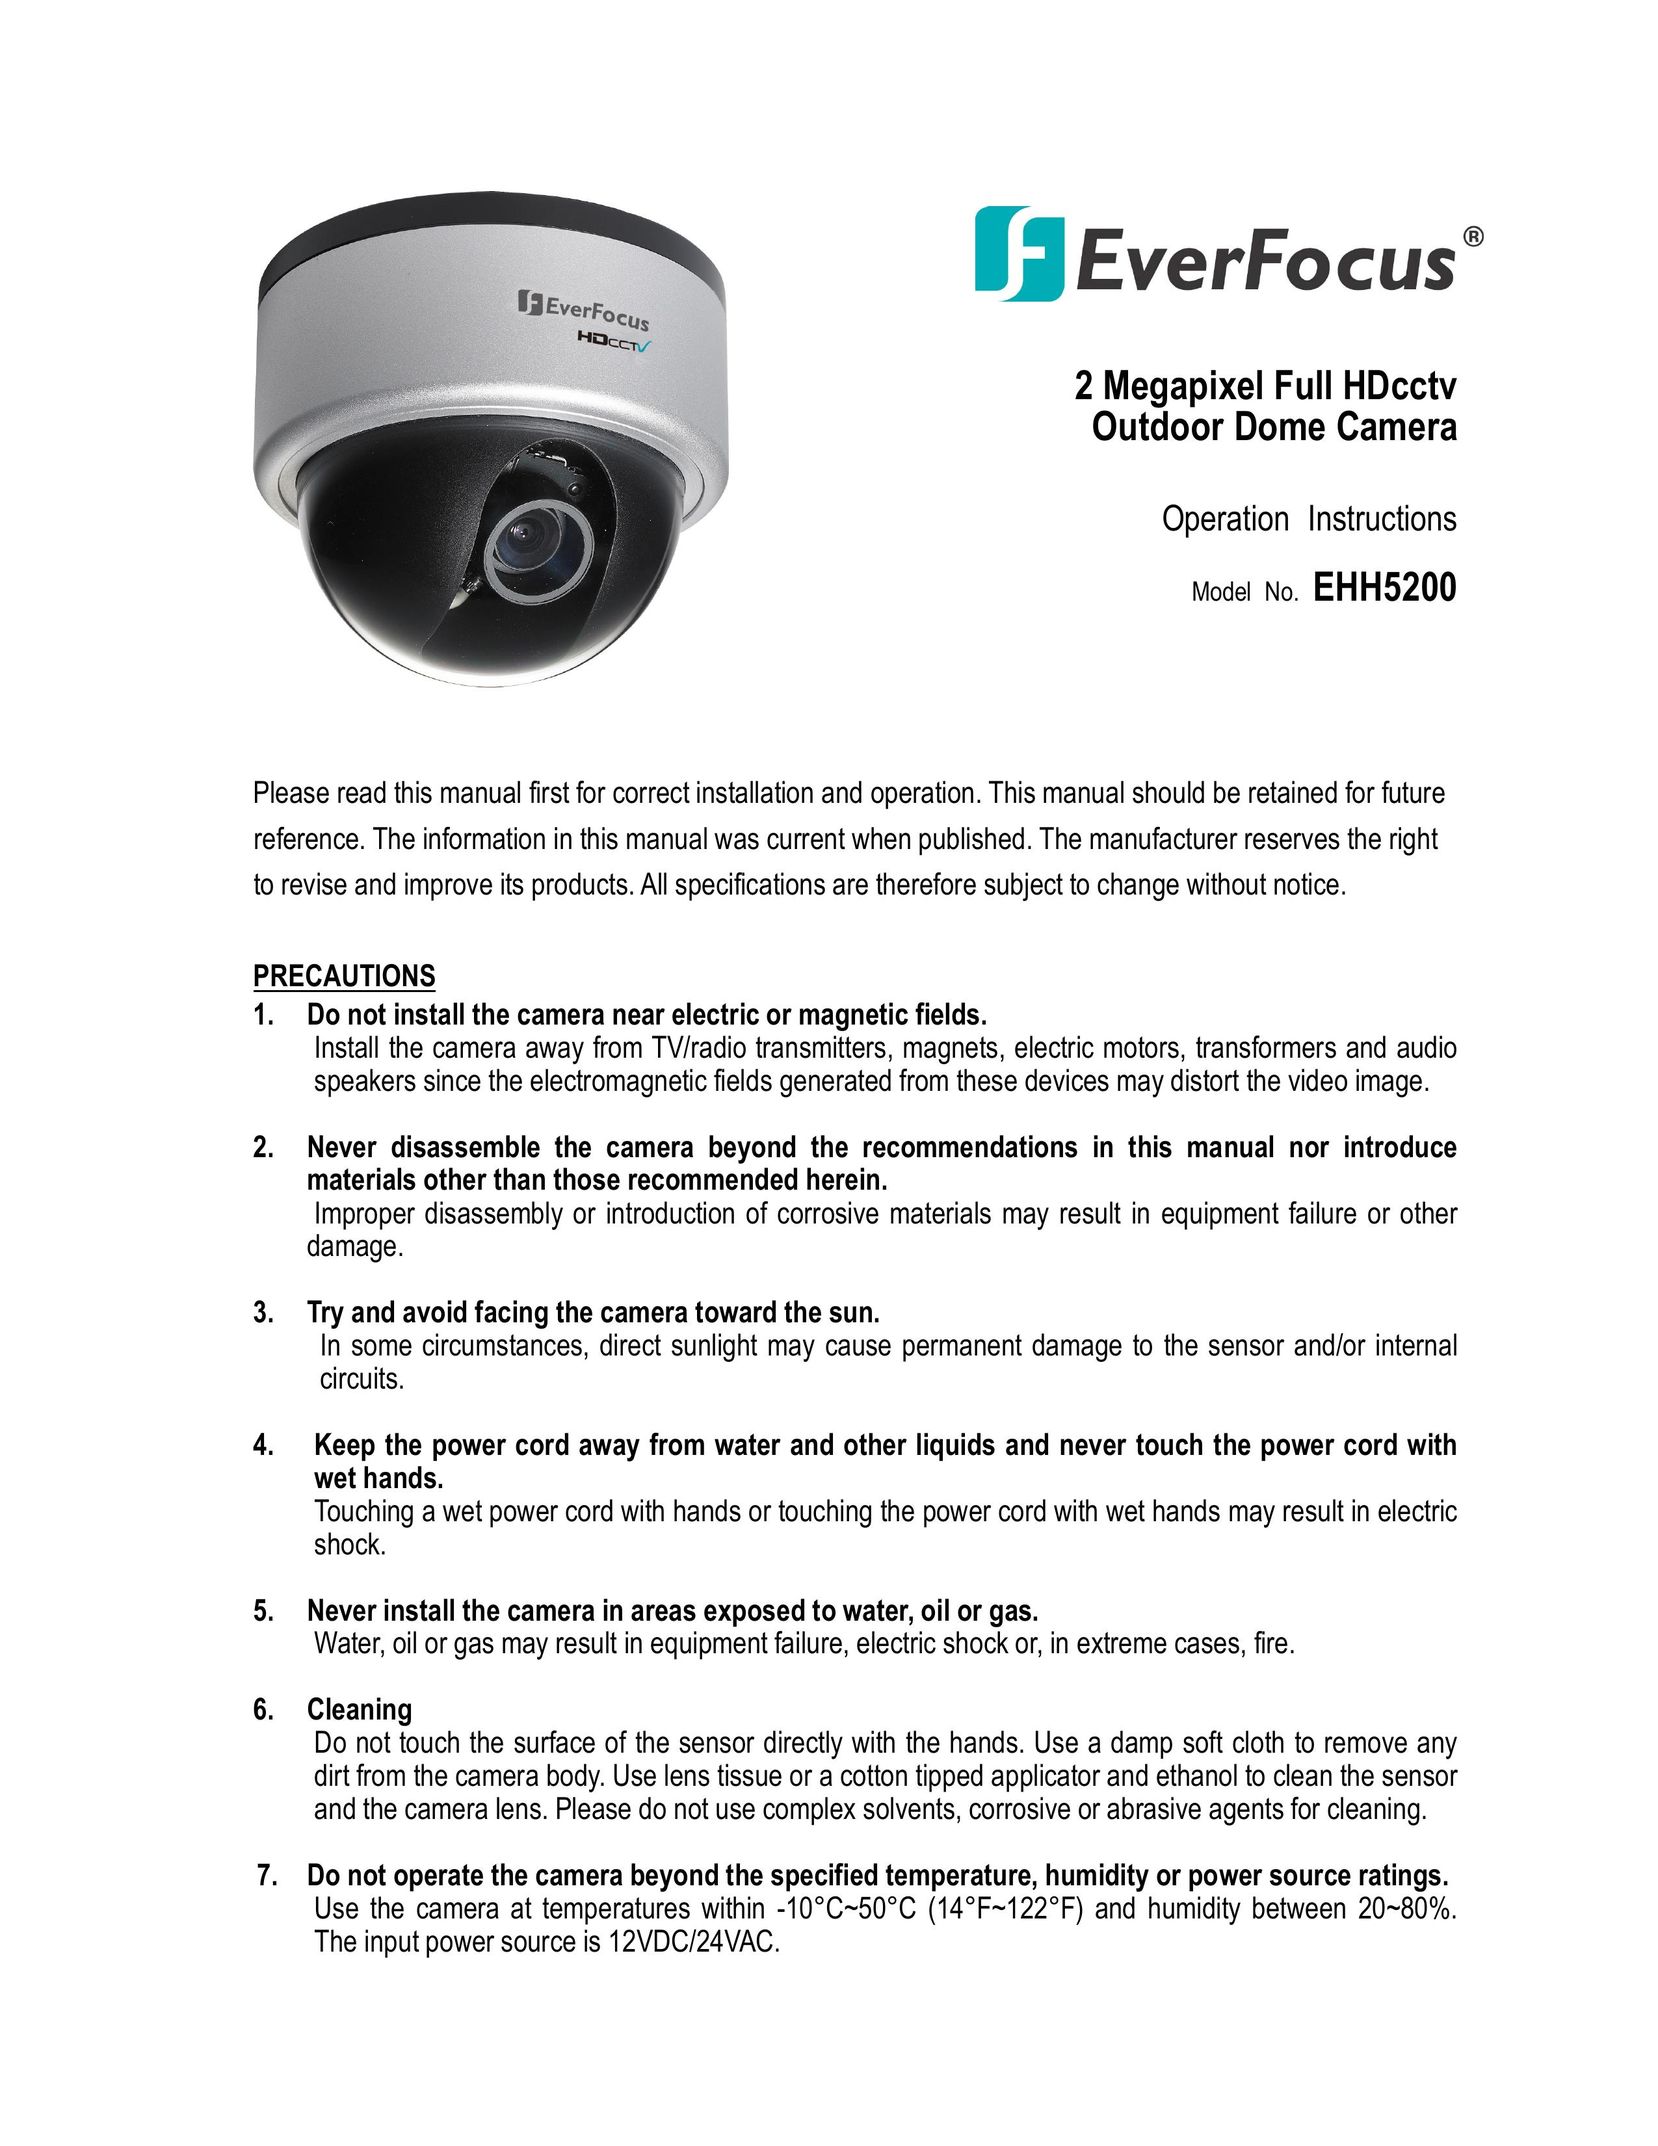 EverFocus EHH5200 Home Security System User Manual